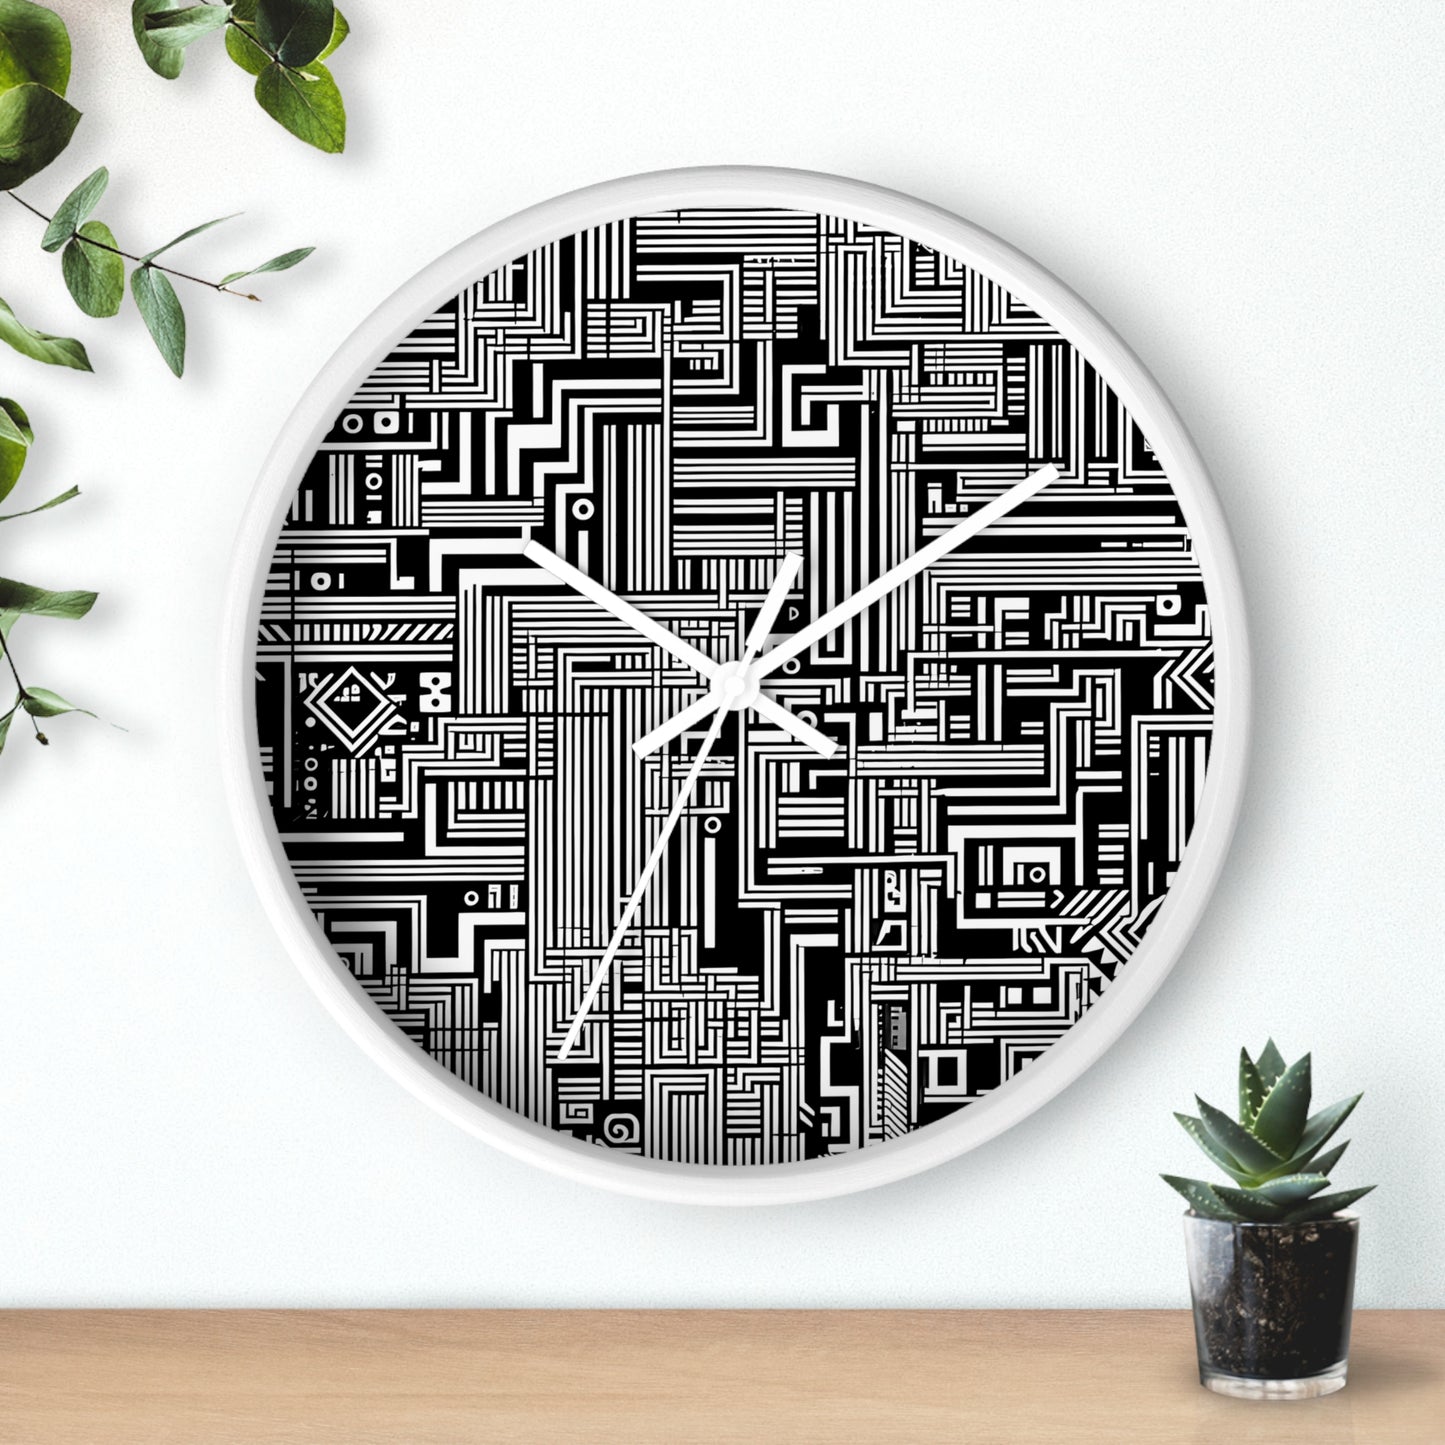 White Circuit Design Wall Clock, a tech-inspired timepiece perfect for contemporary design wall clock enthusiasts, featuring unique circuitry patterns and precision time-telling features for chic home accessories.